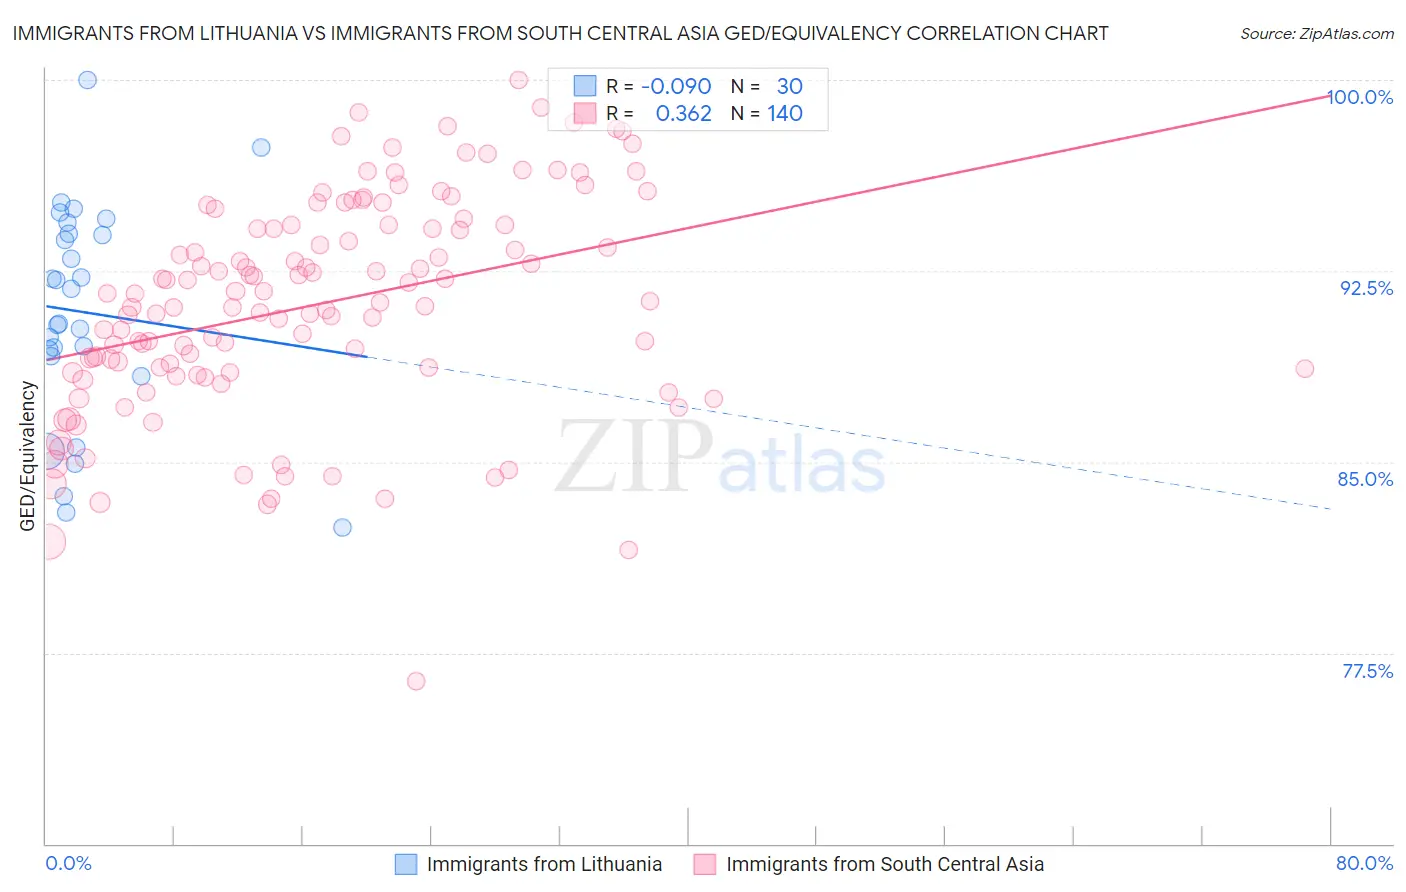 Immigrants from Lithuania vs Immigrants from South Central Asia GED/Equivalency